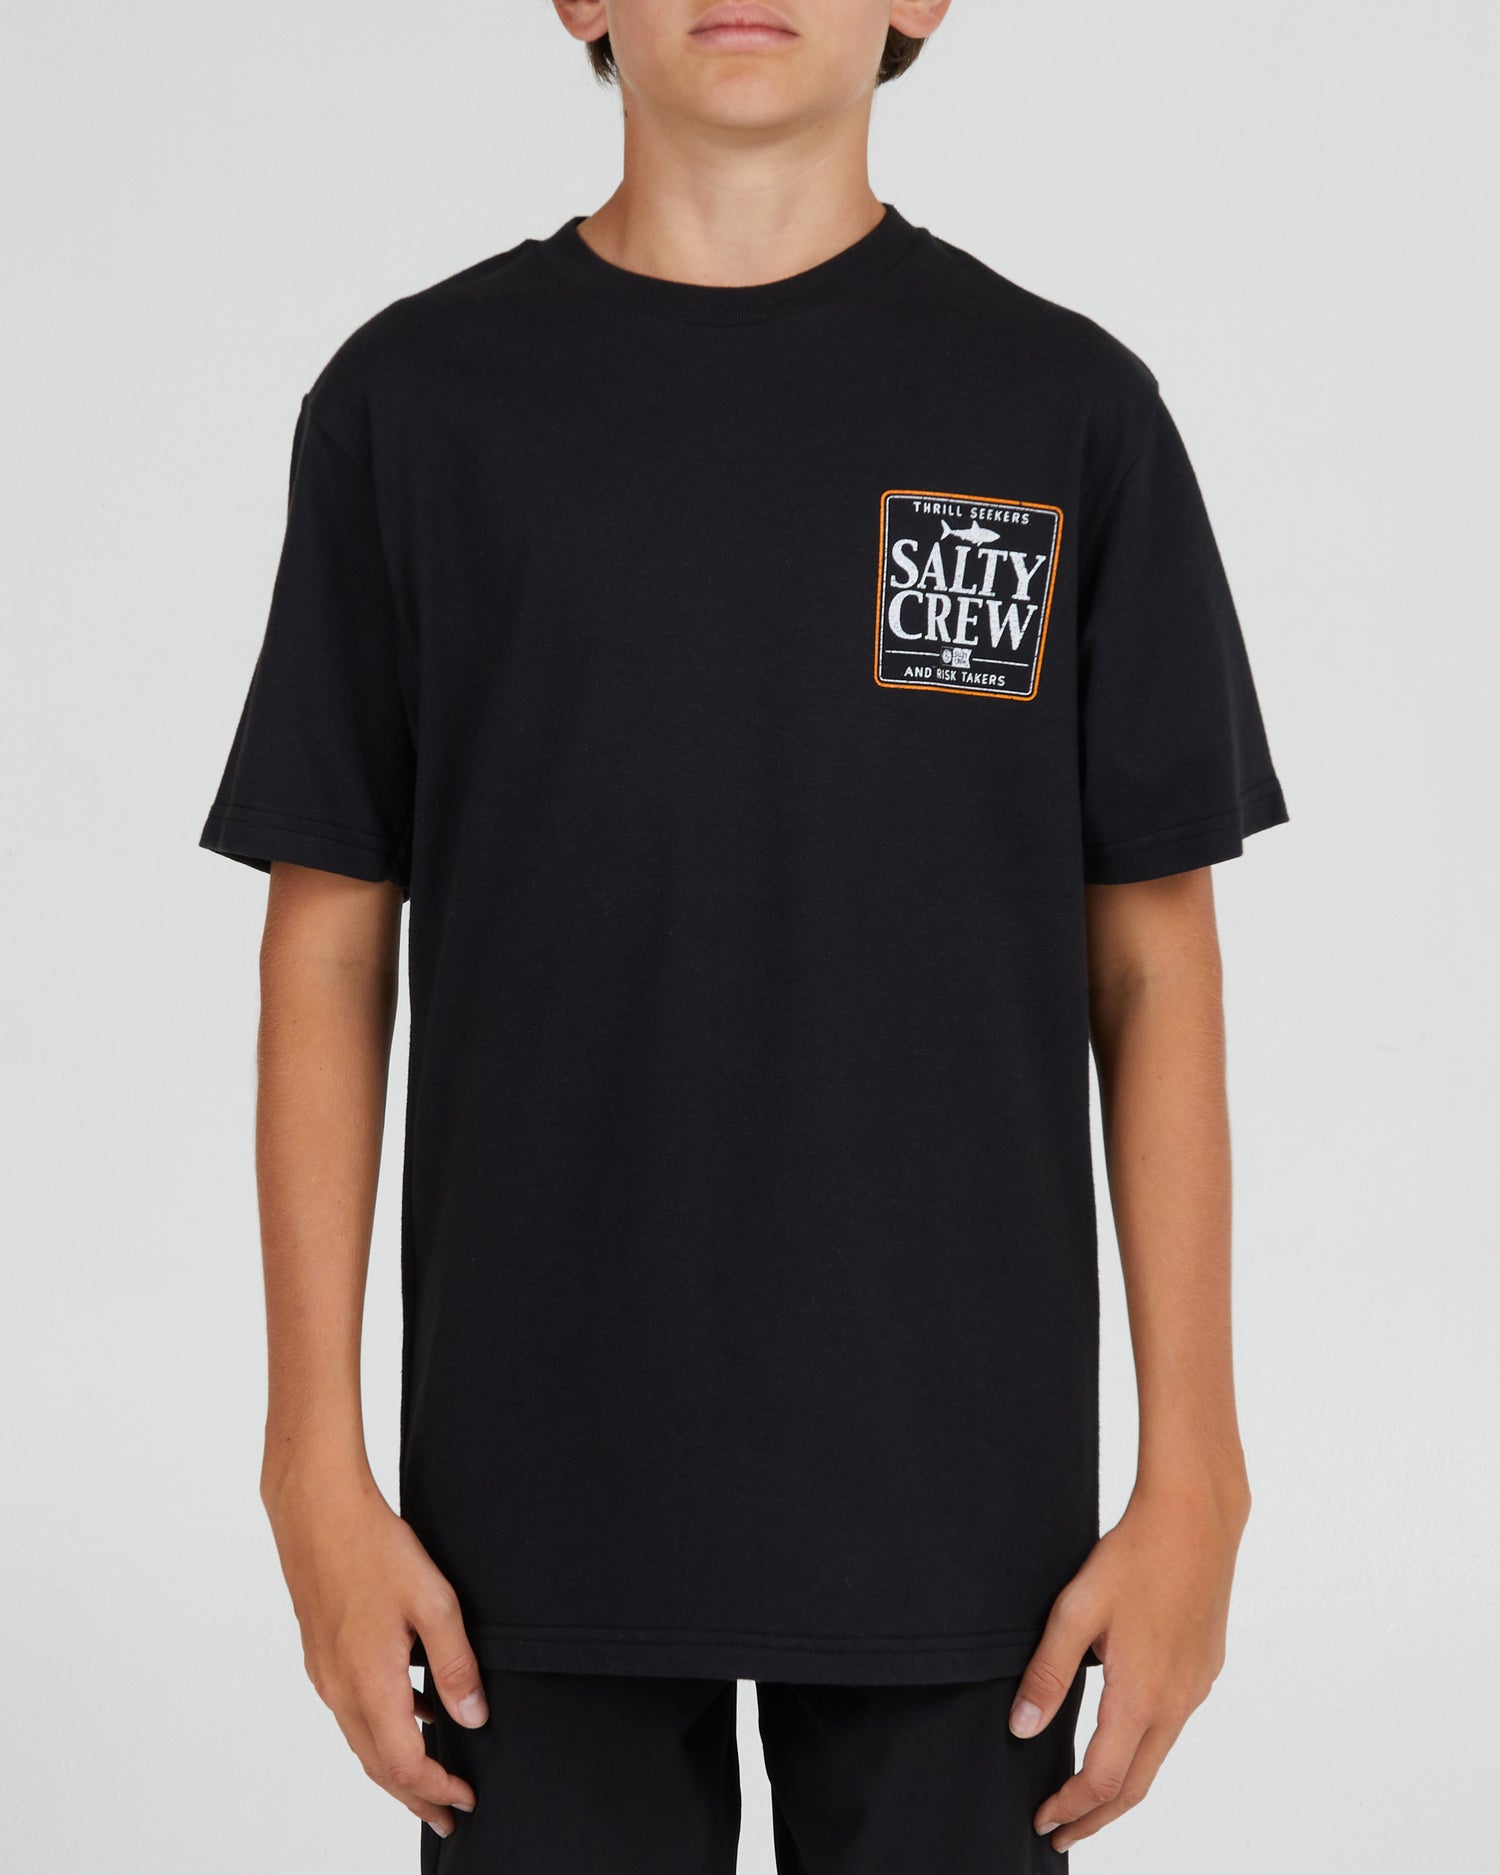 On body front of the Coaster Boys Black S/S Tee